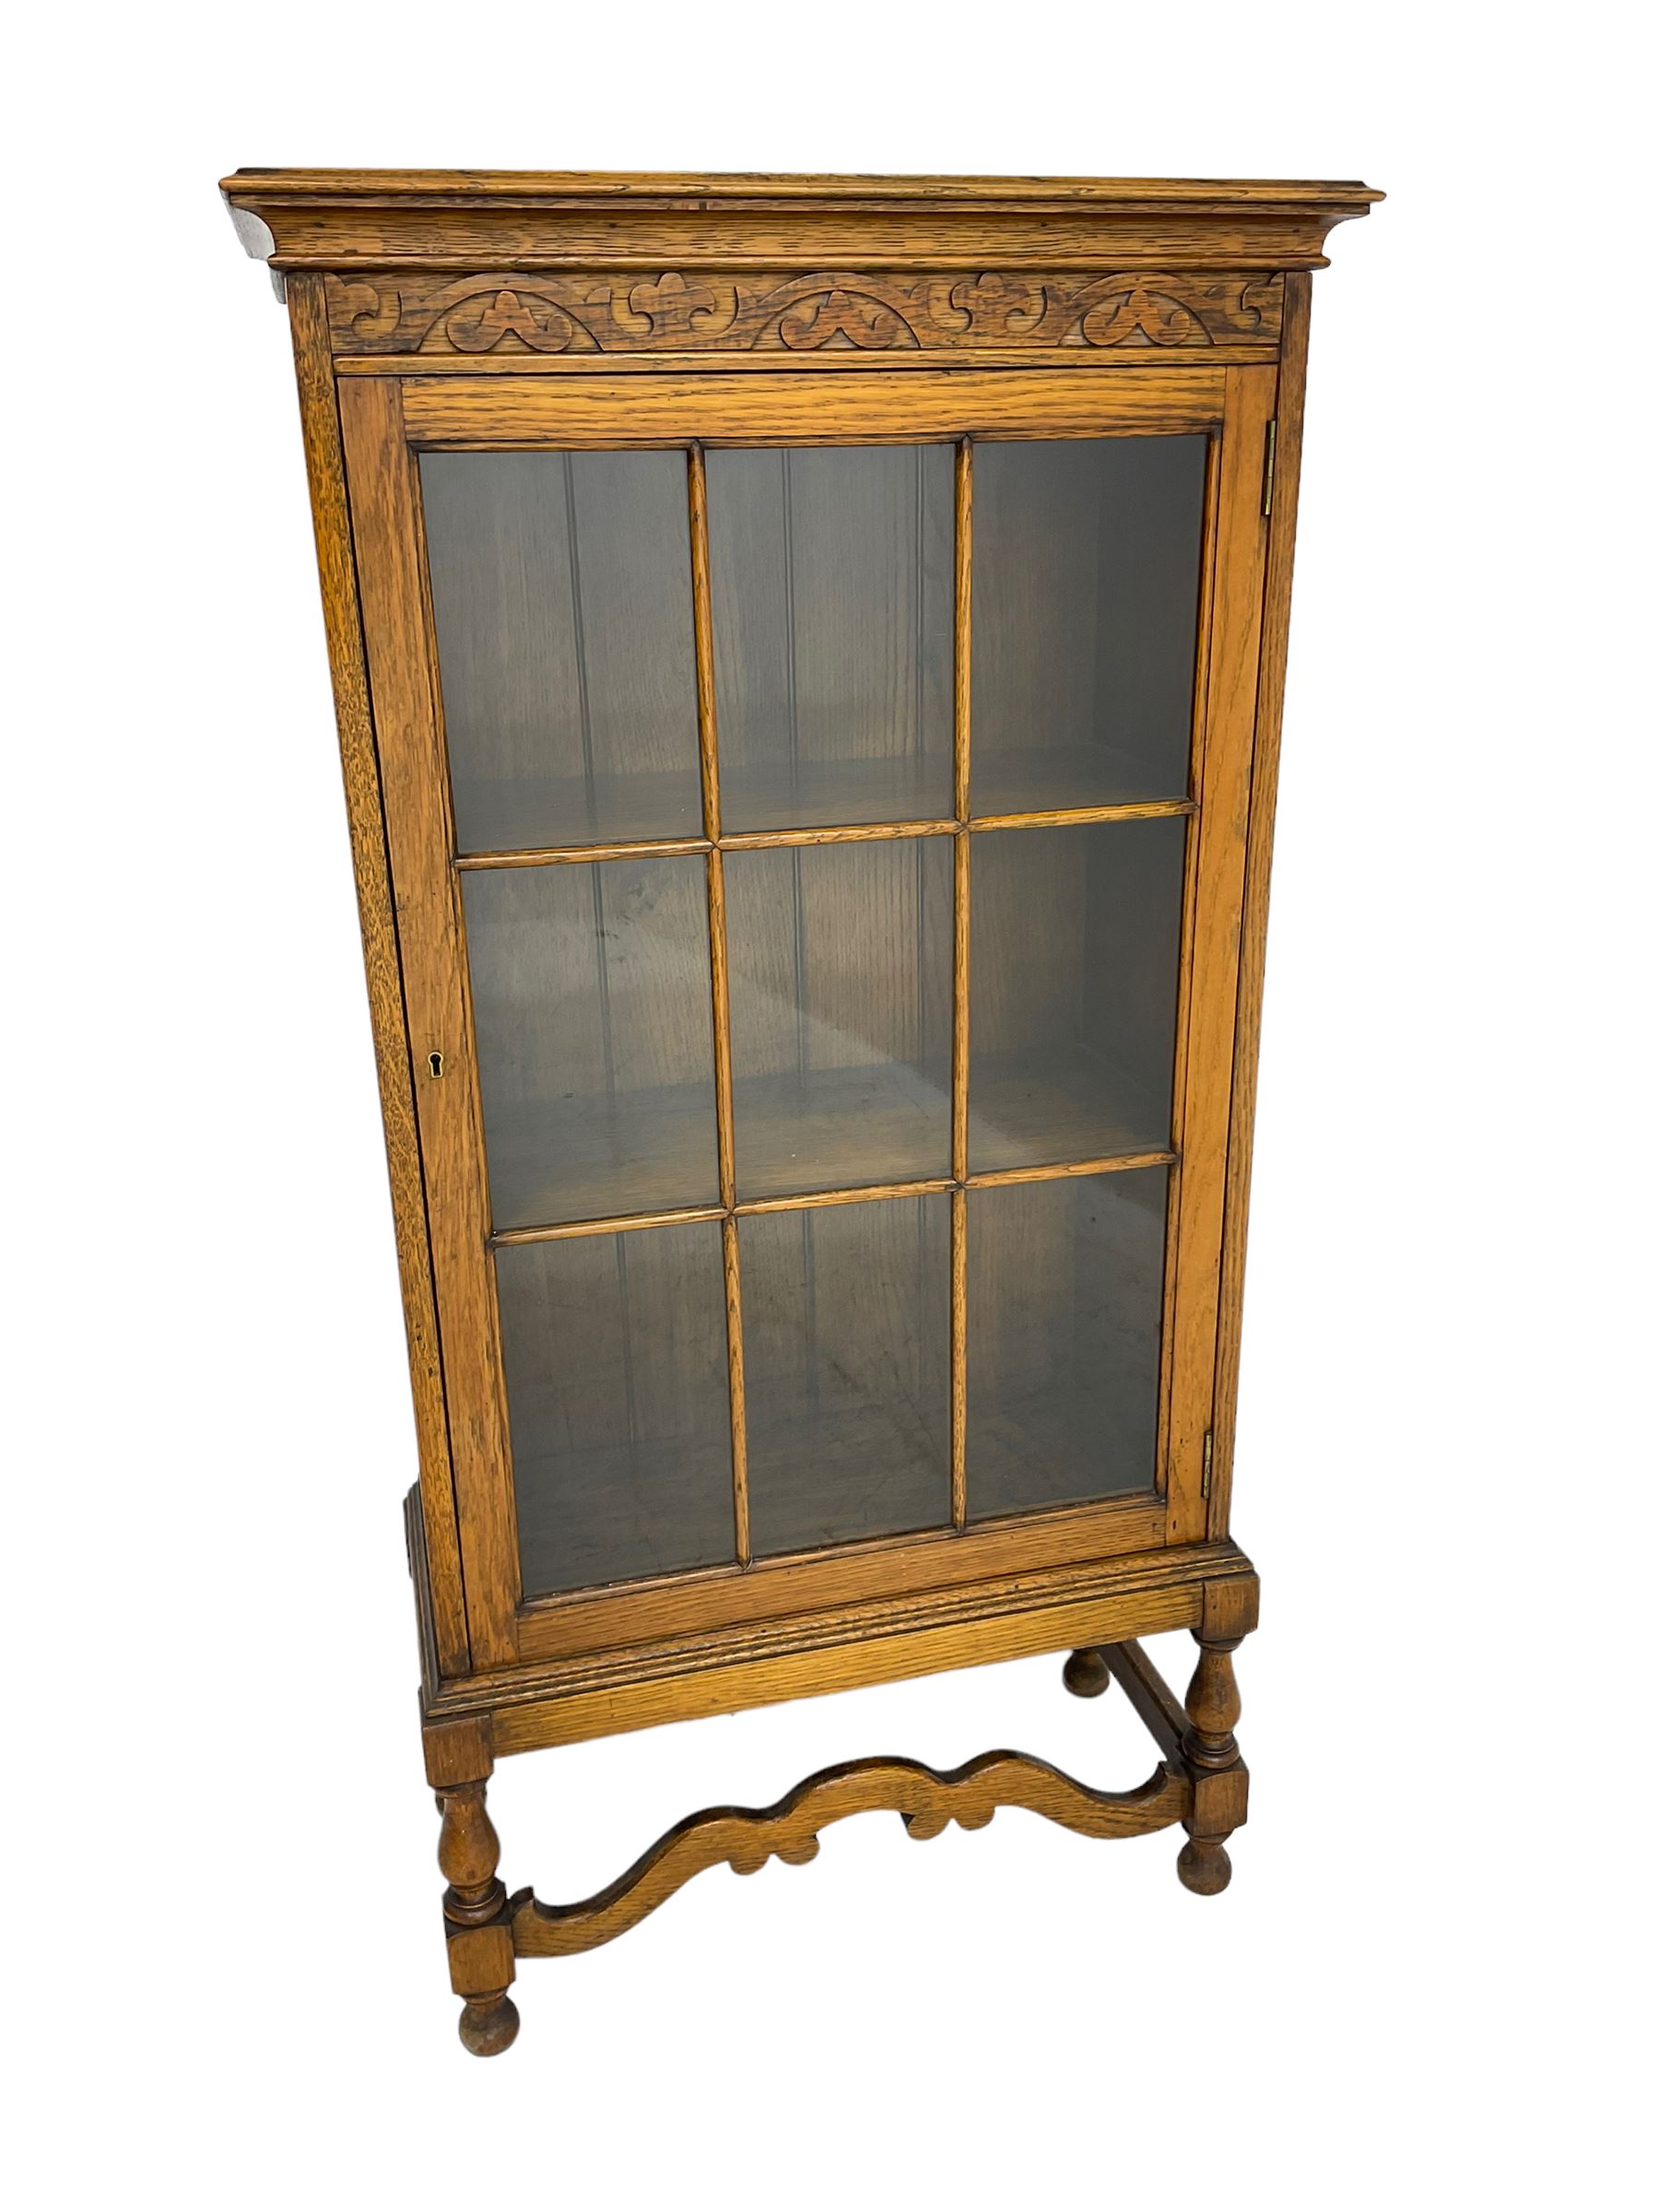 Early 20th century oak bookcase display cabinet